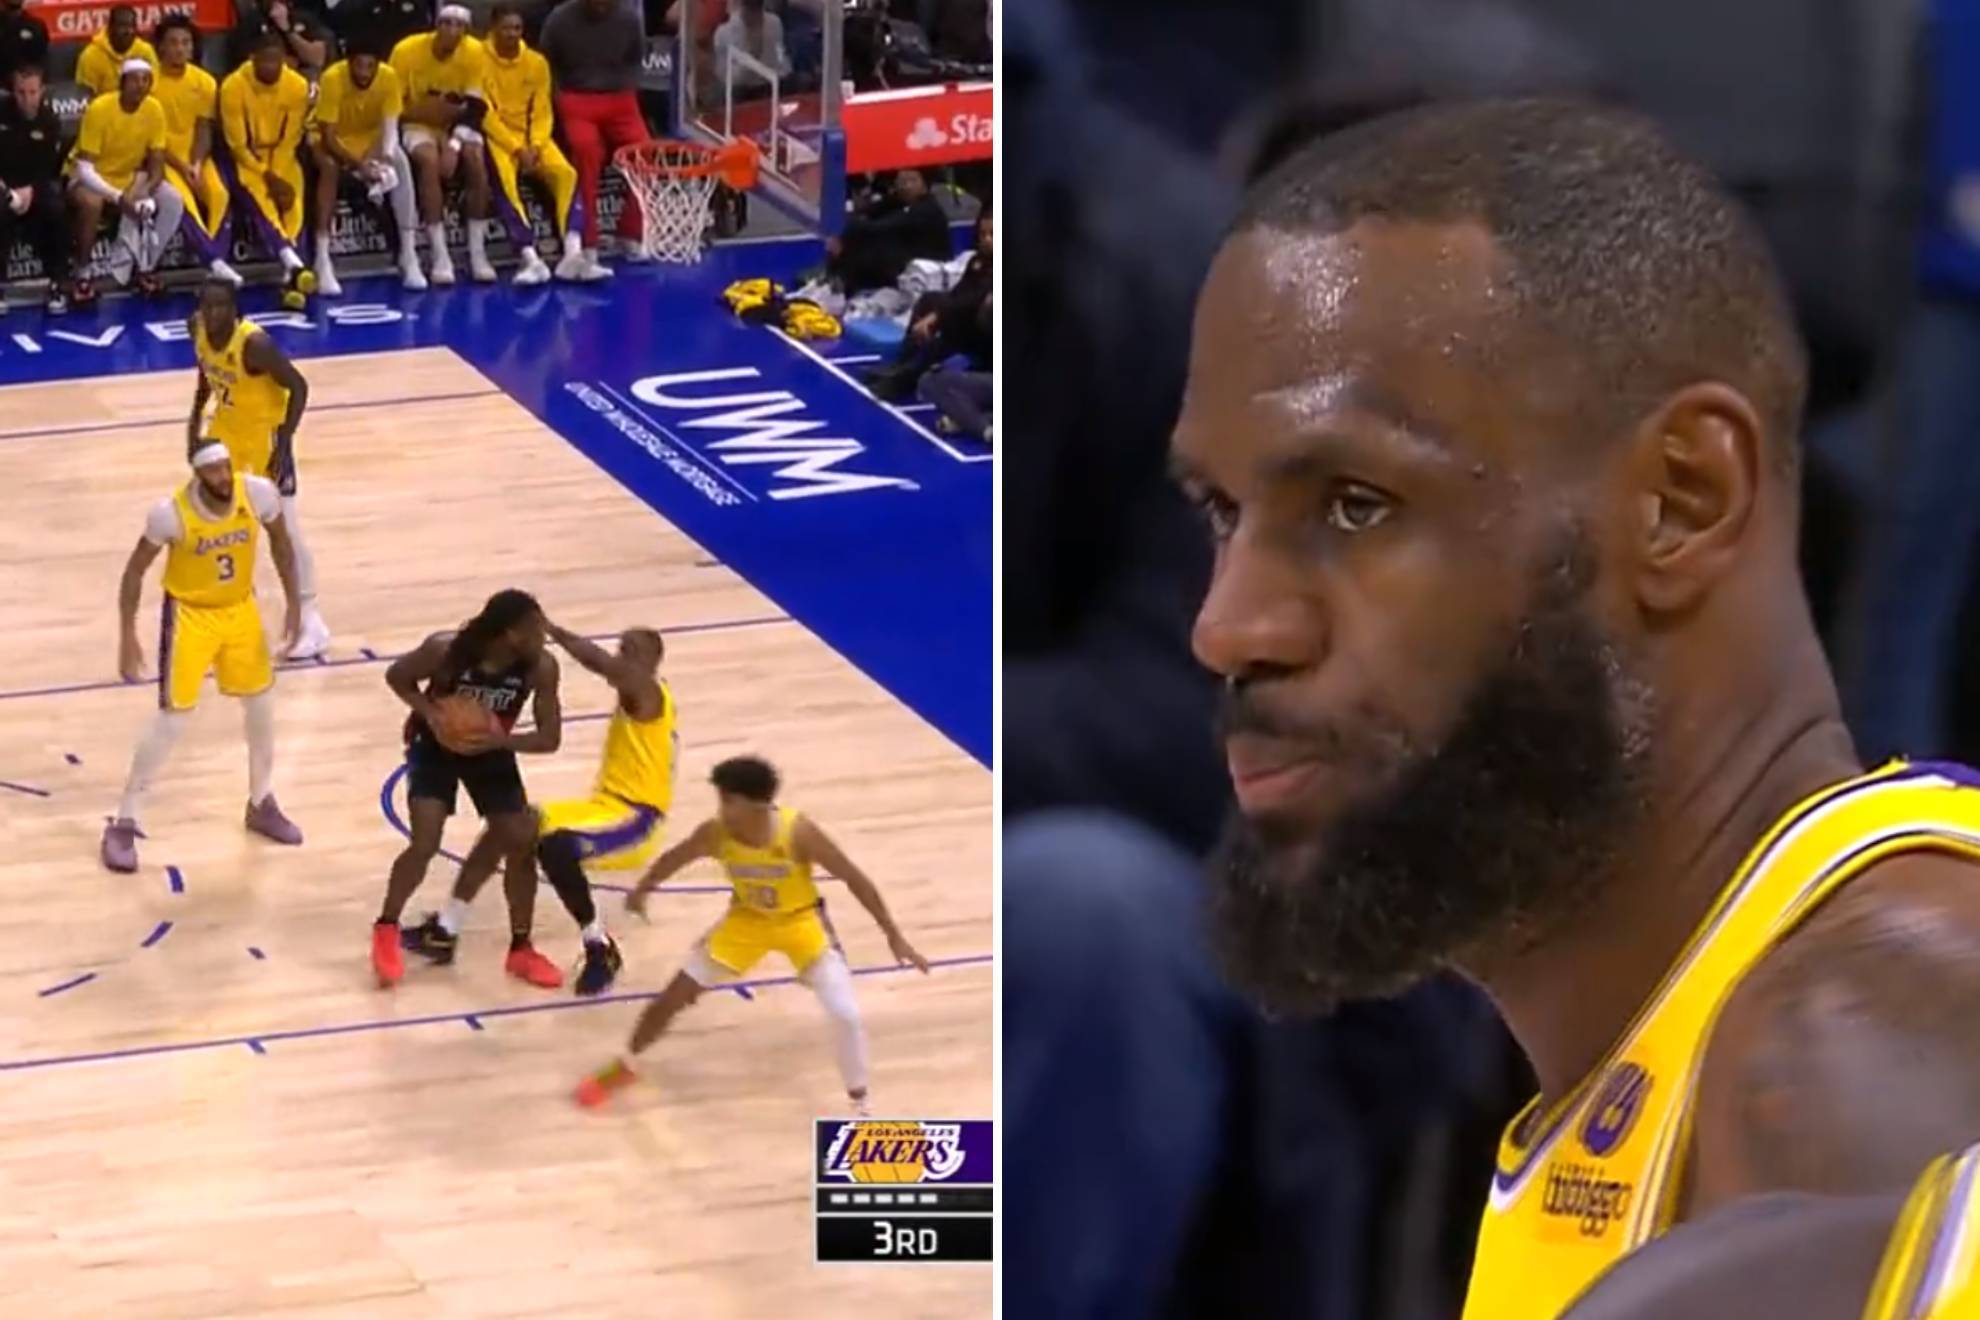 Flopping by Lebron James leaves him embarrassed